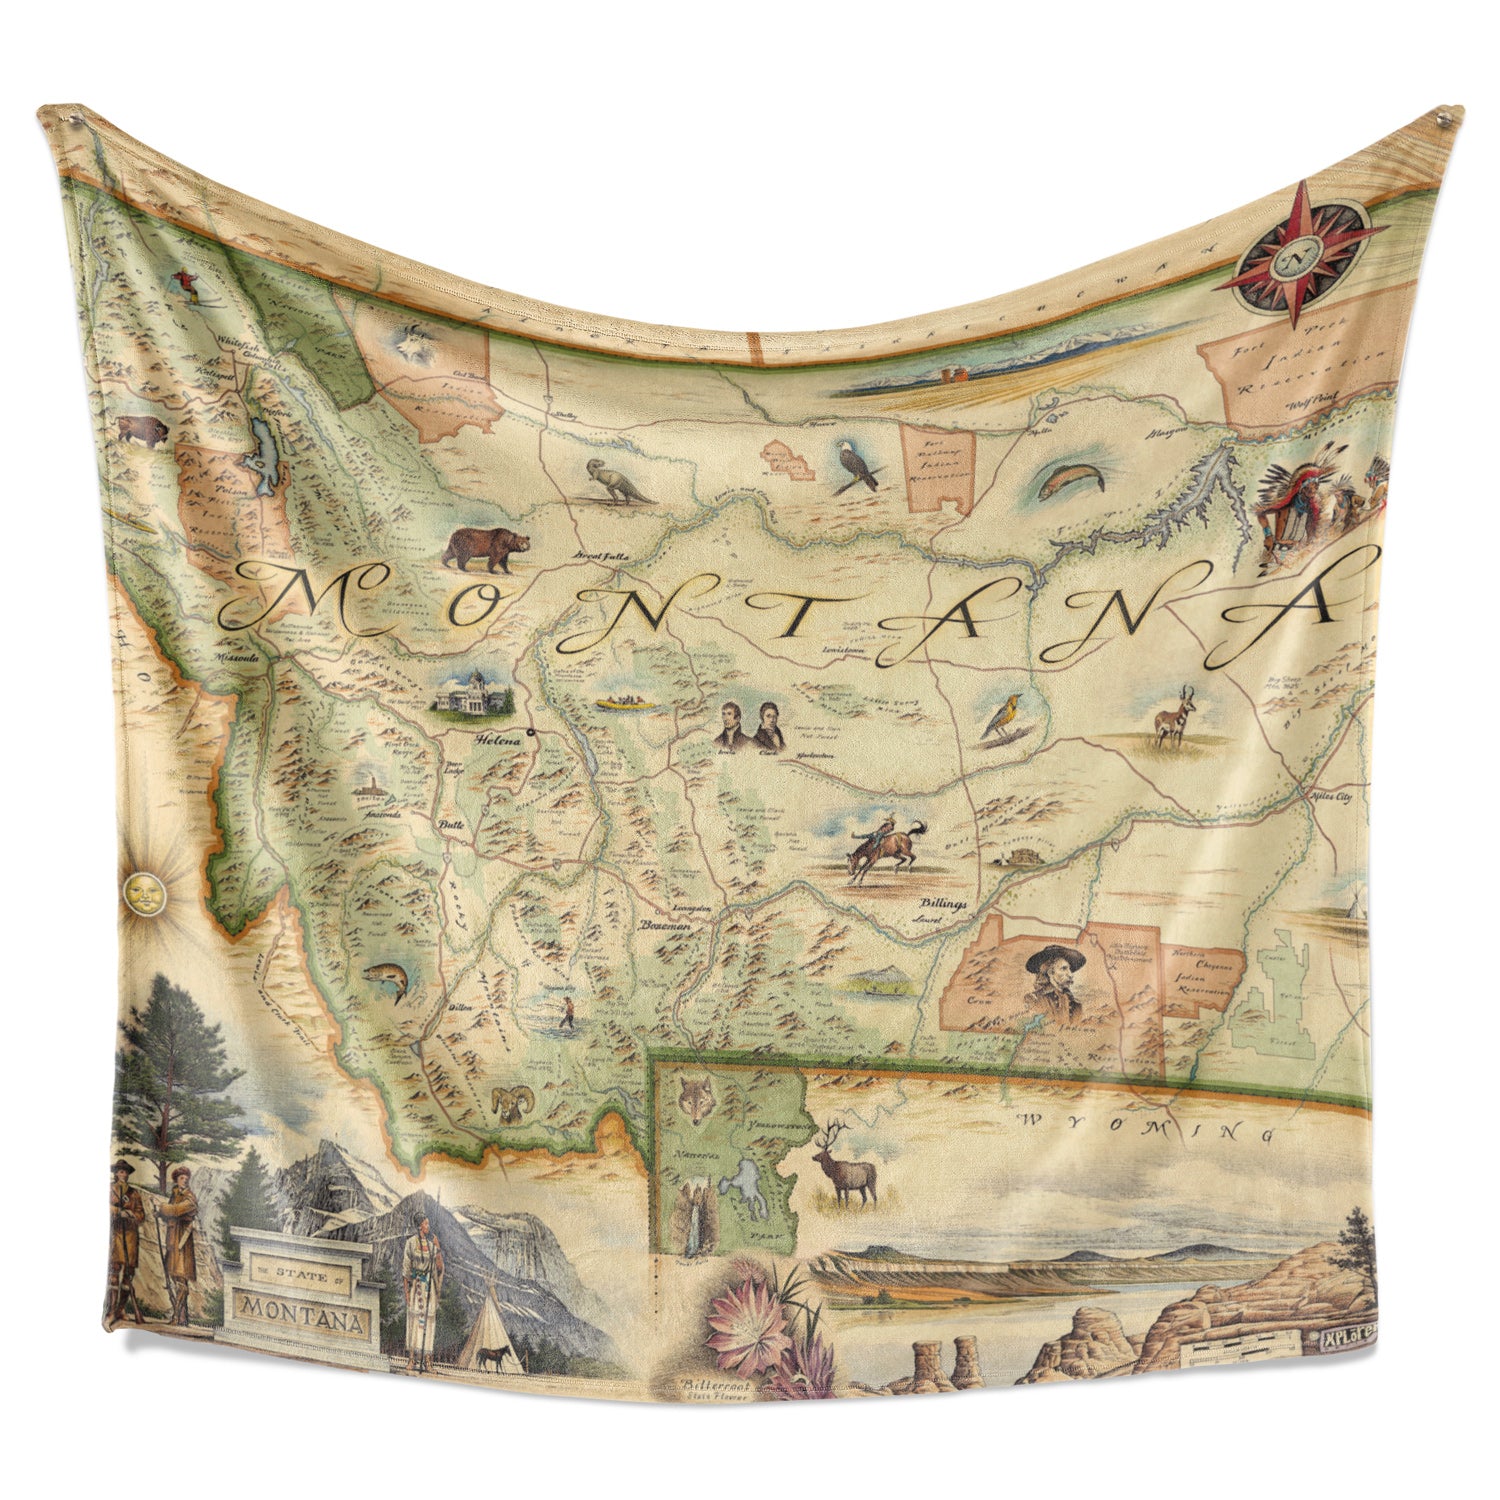 Hanging fleece blanket with map of Montana on it. Cozy and soft blanket, measures 58